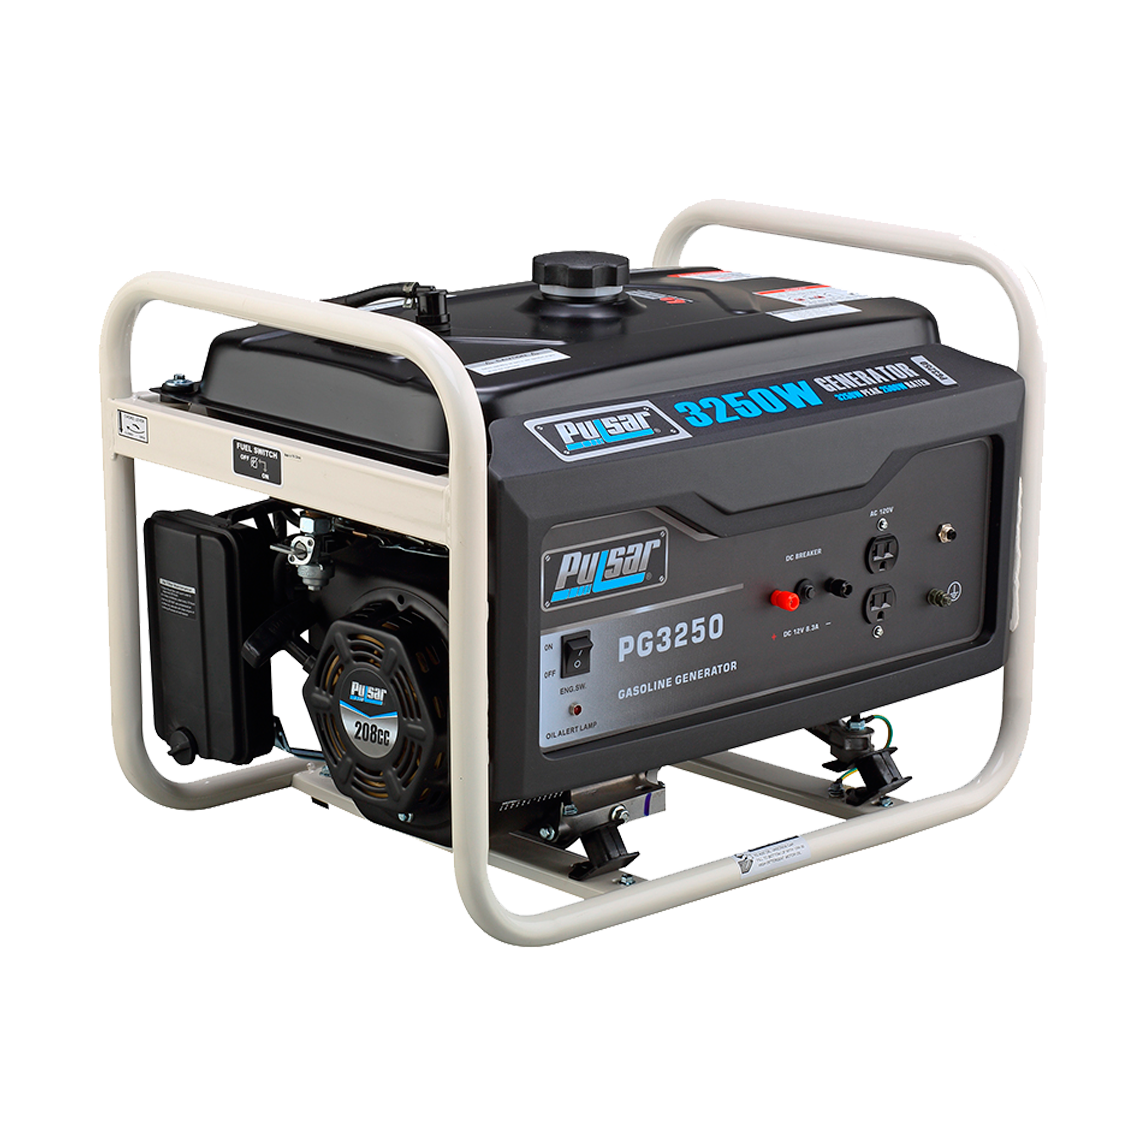 Pulsar 3250W Portable Emergency Gas Generator Engine 7HP Two 120V 20A Outlets